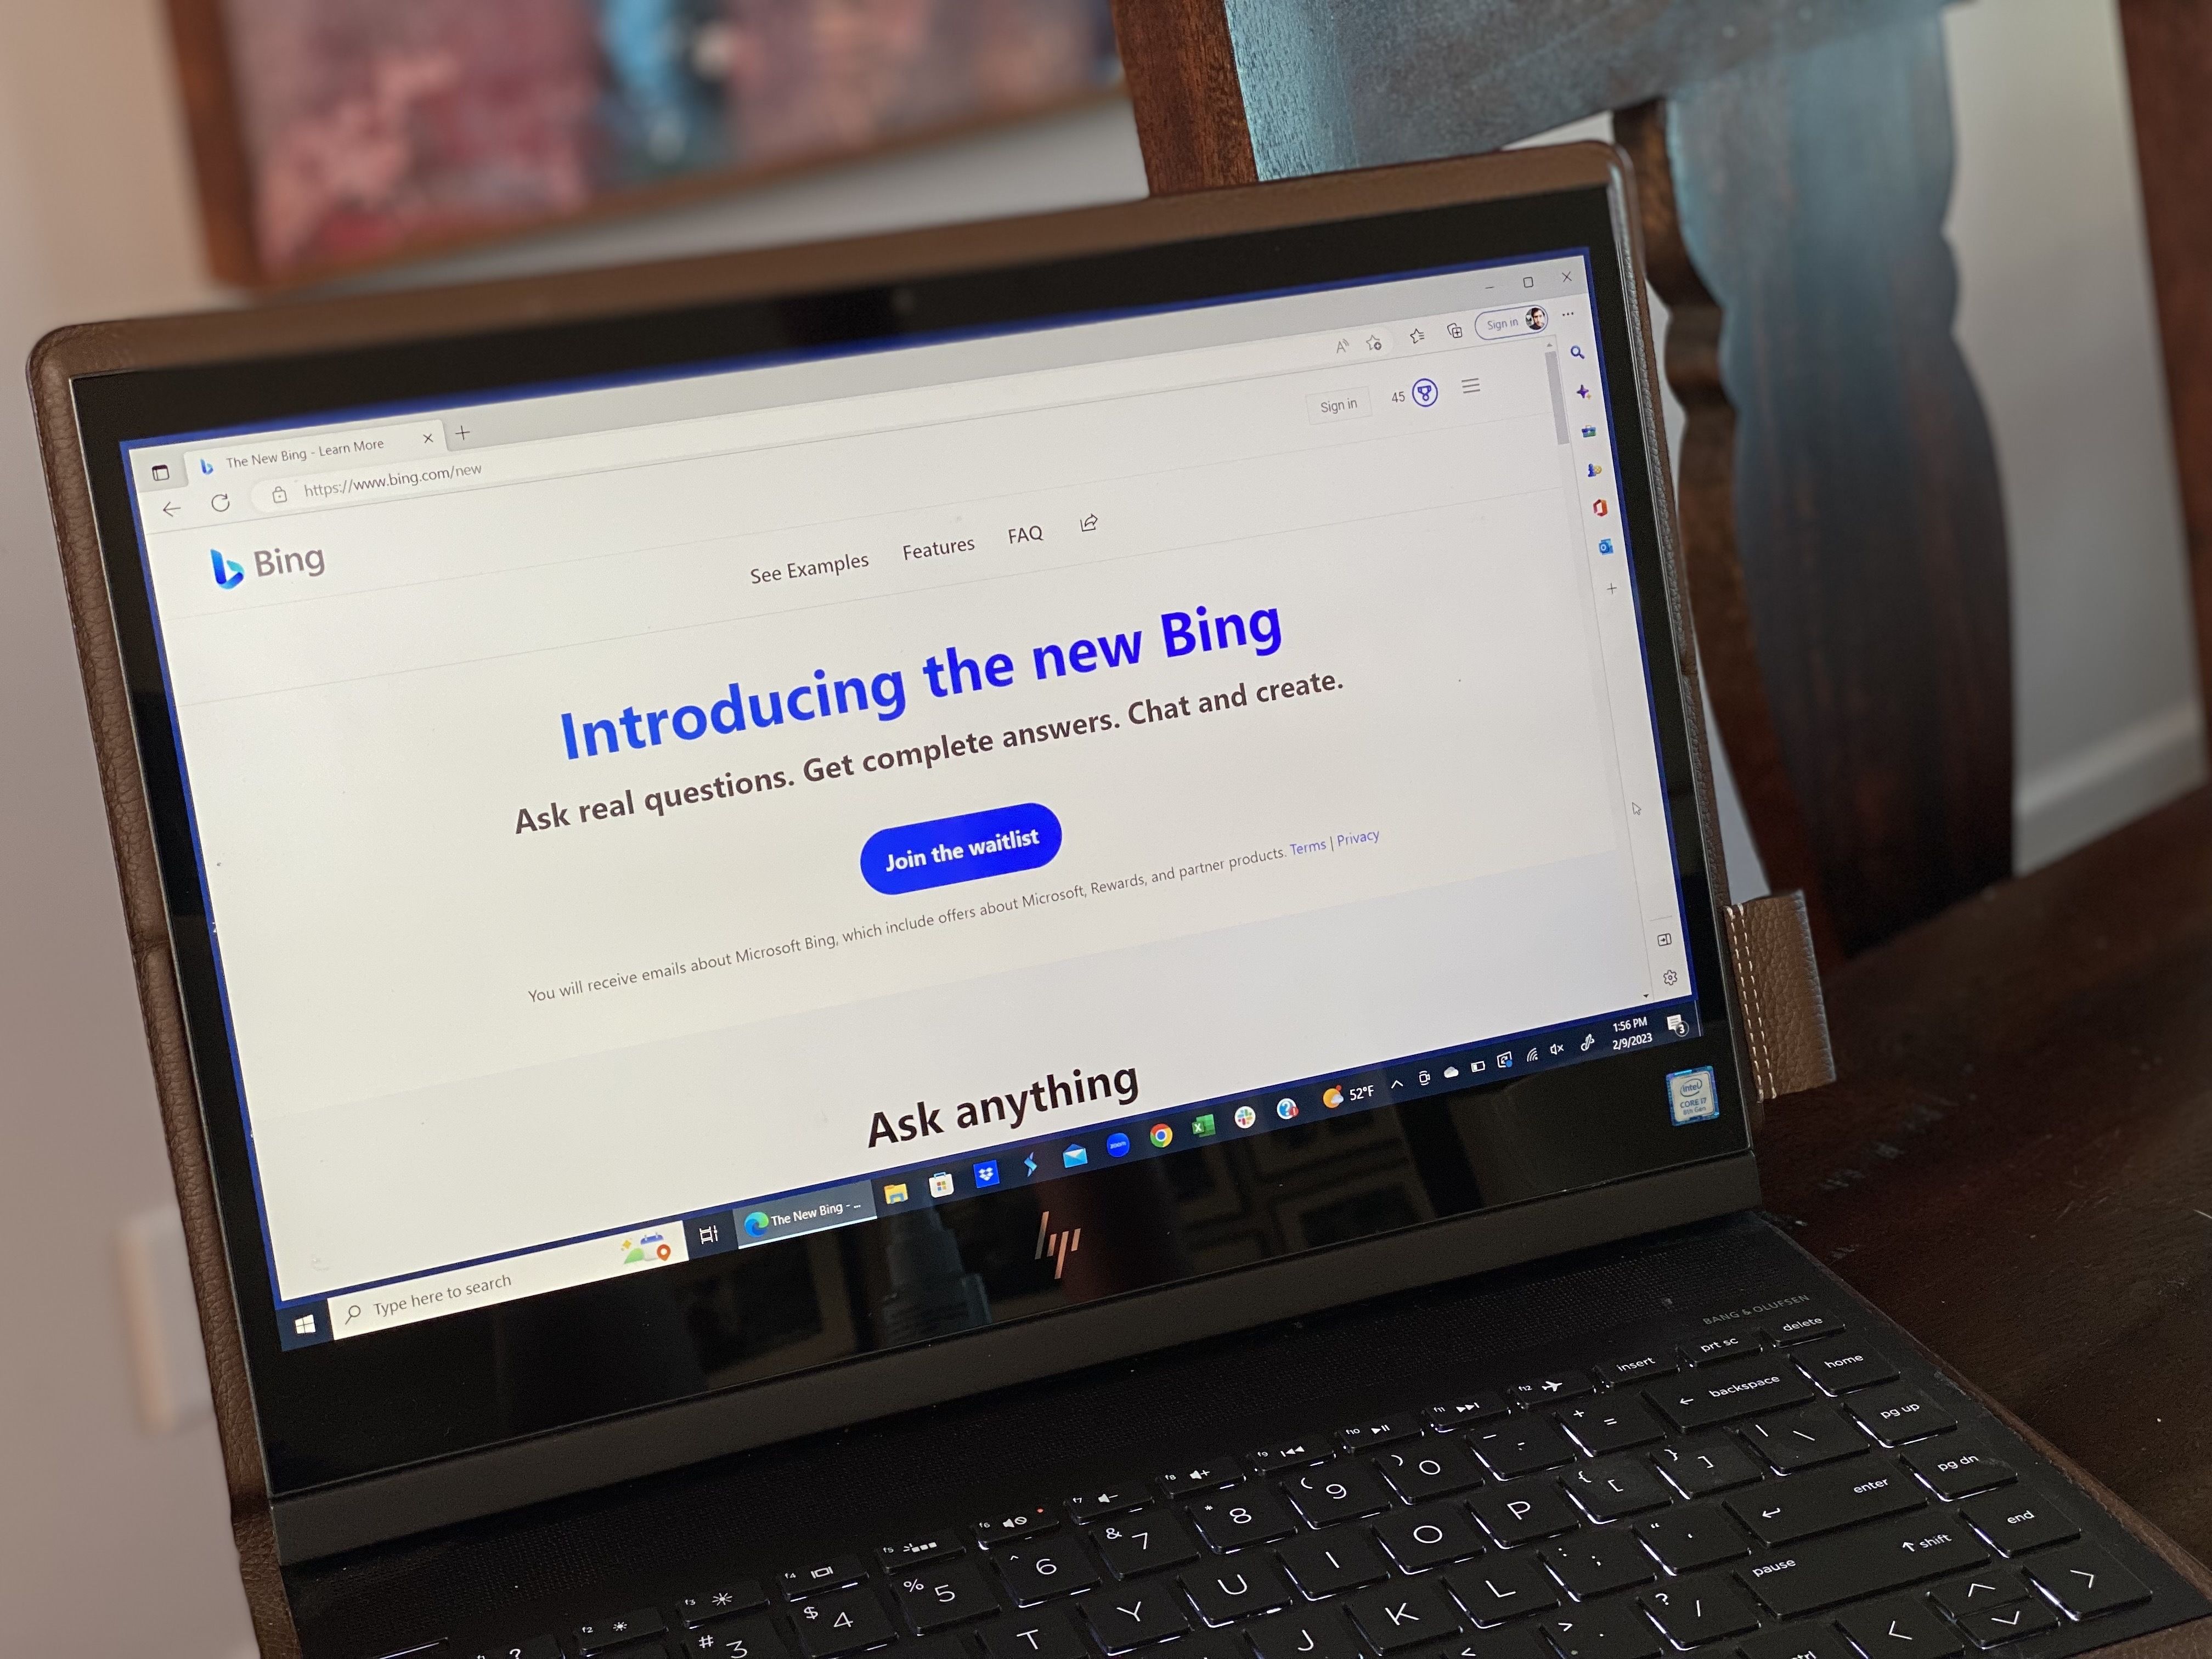 The new bing waitlist on a laptop screen